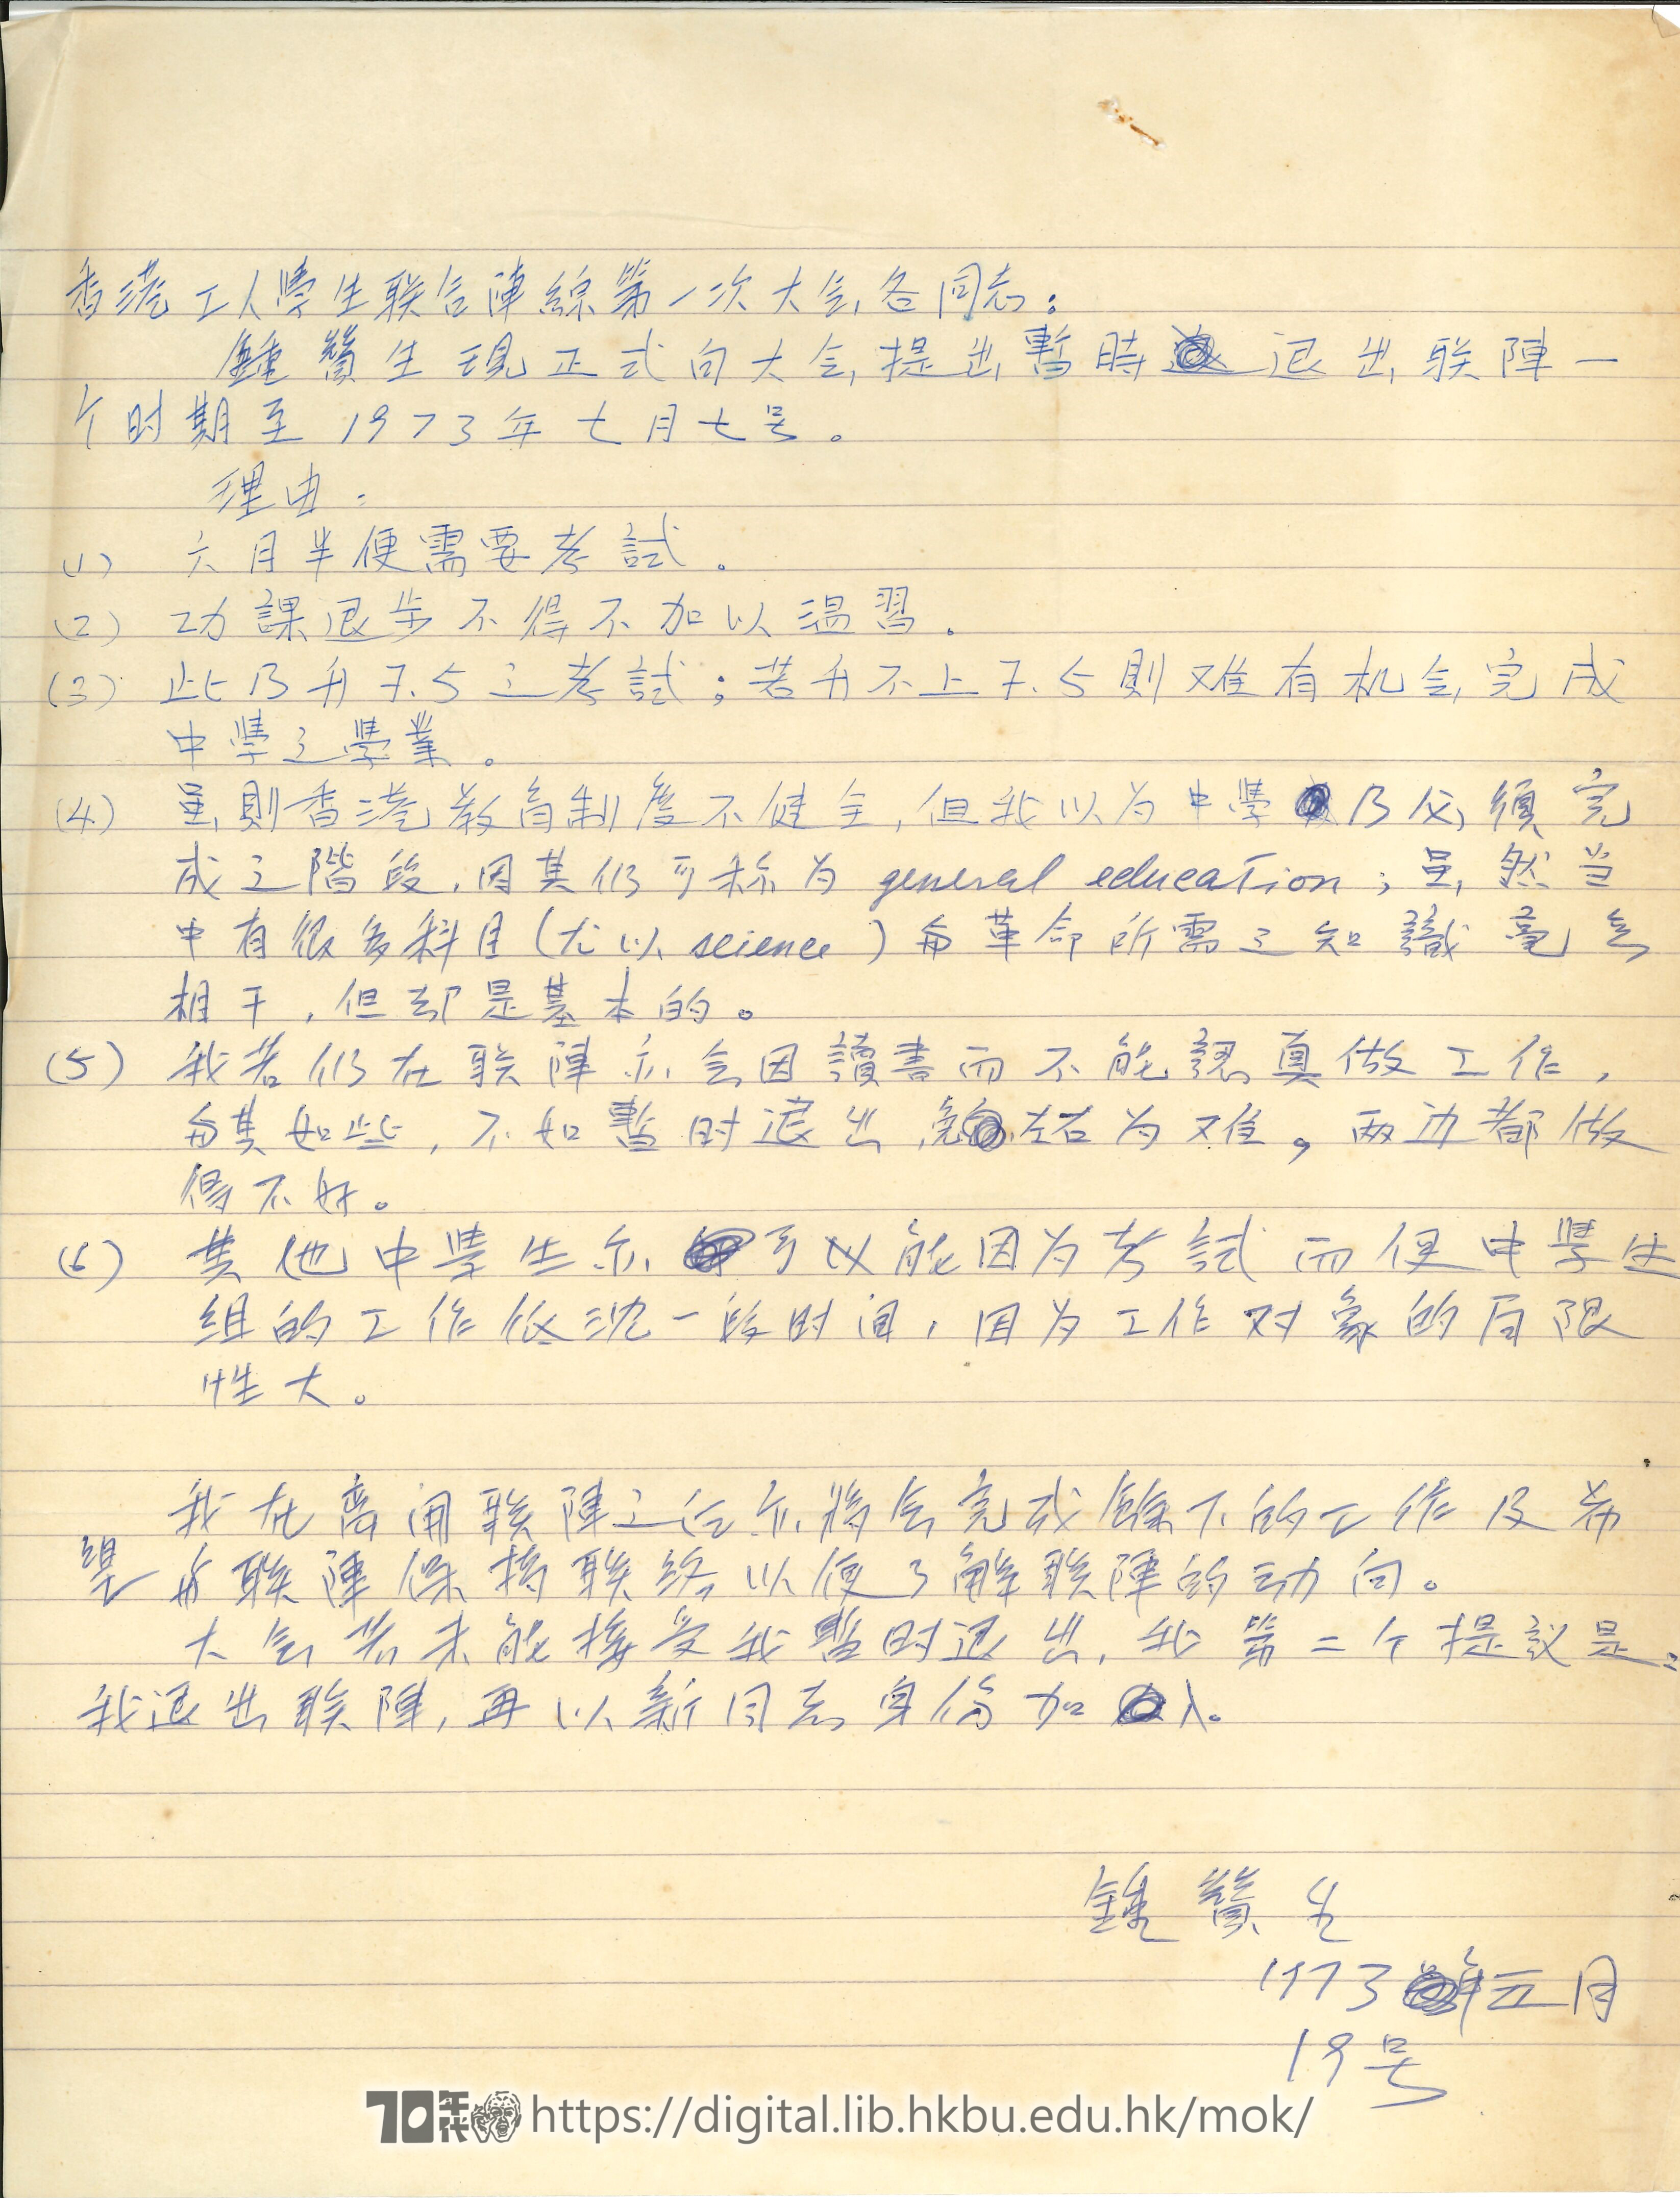   Letter from Chung Chan-sang to members of United Front 鐘贊生 